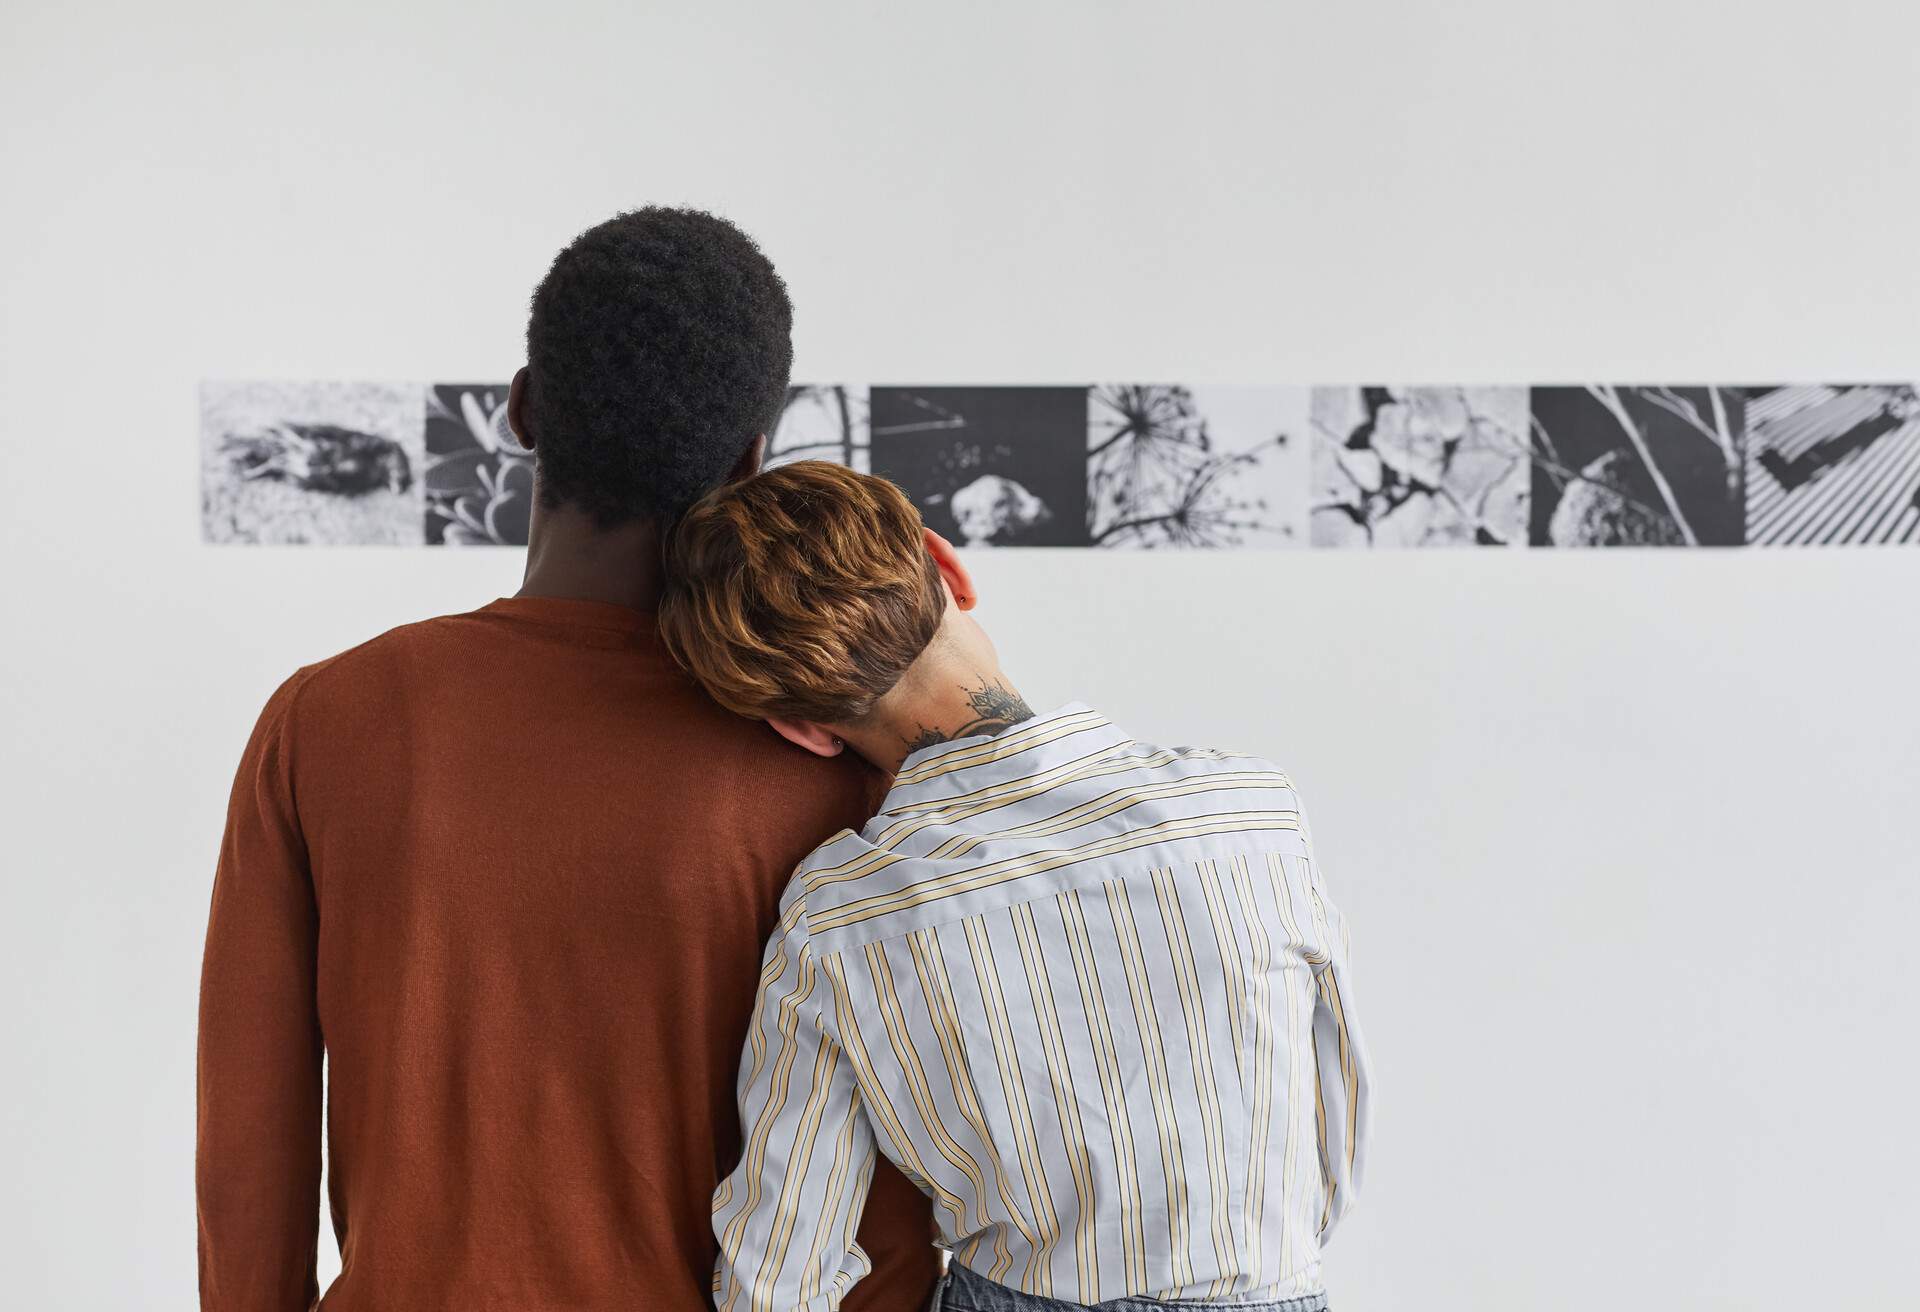 THEME_MUSEUM_ART_GALLERY_PEOPLE_COUPLE_GettyImages